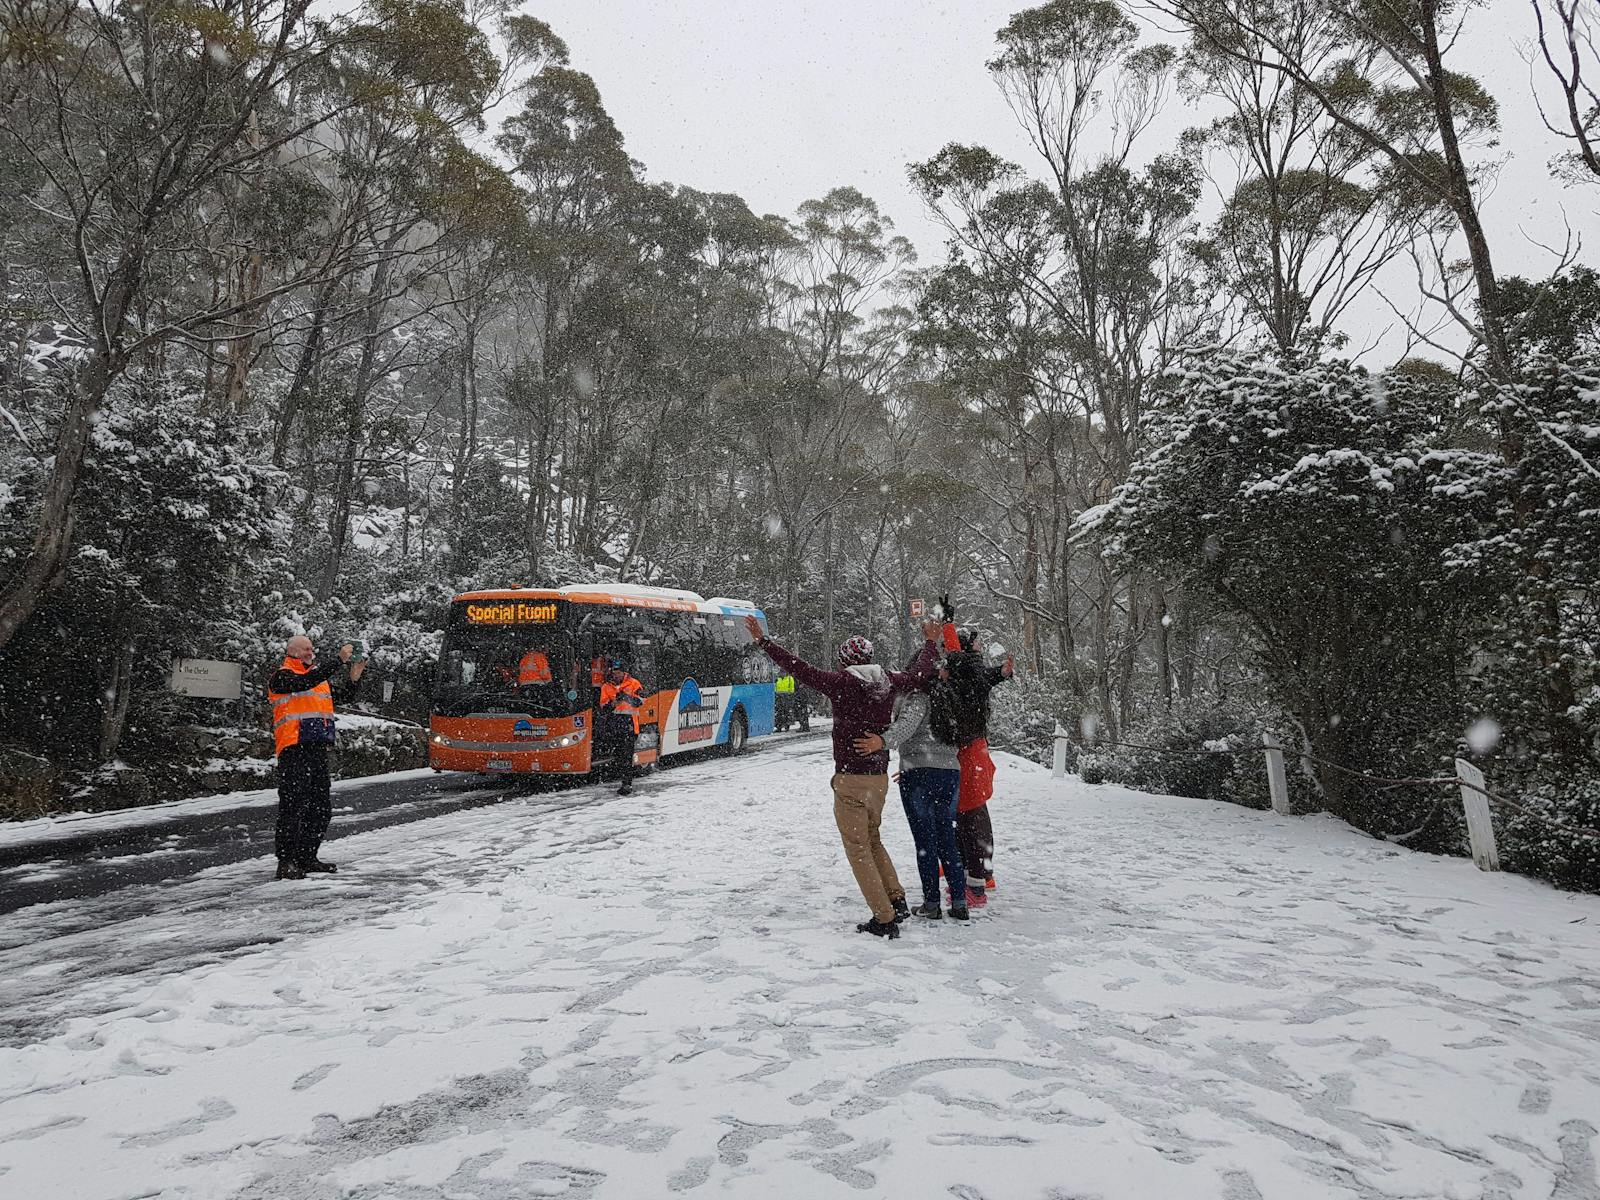 Passengers playing in the snow. Bus in the background.